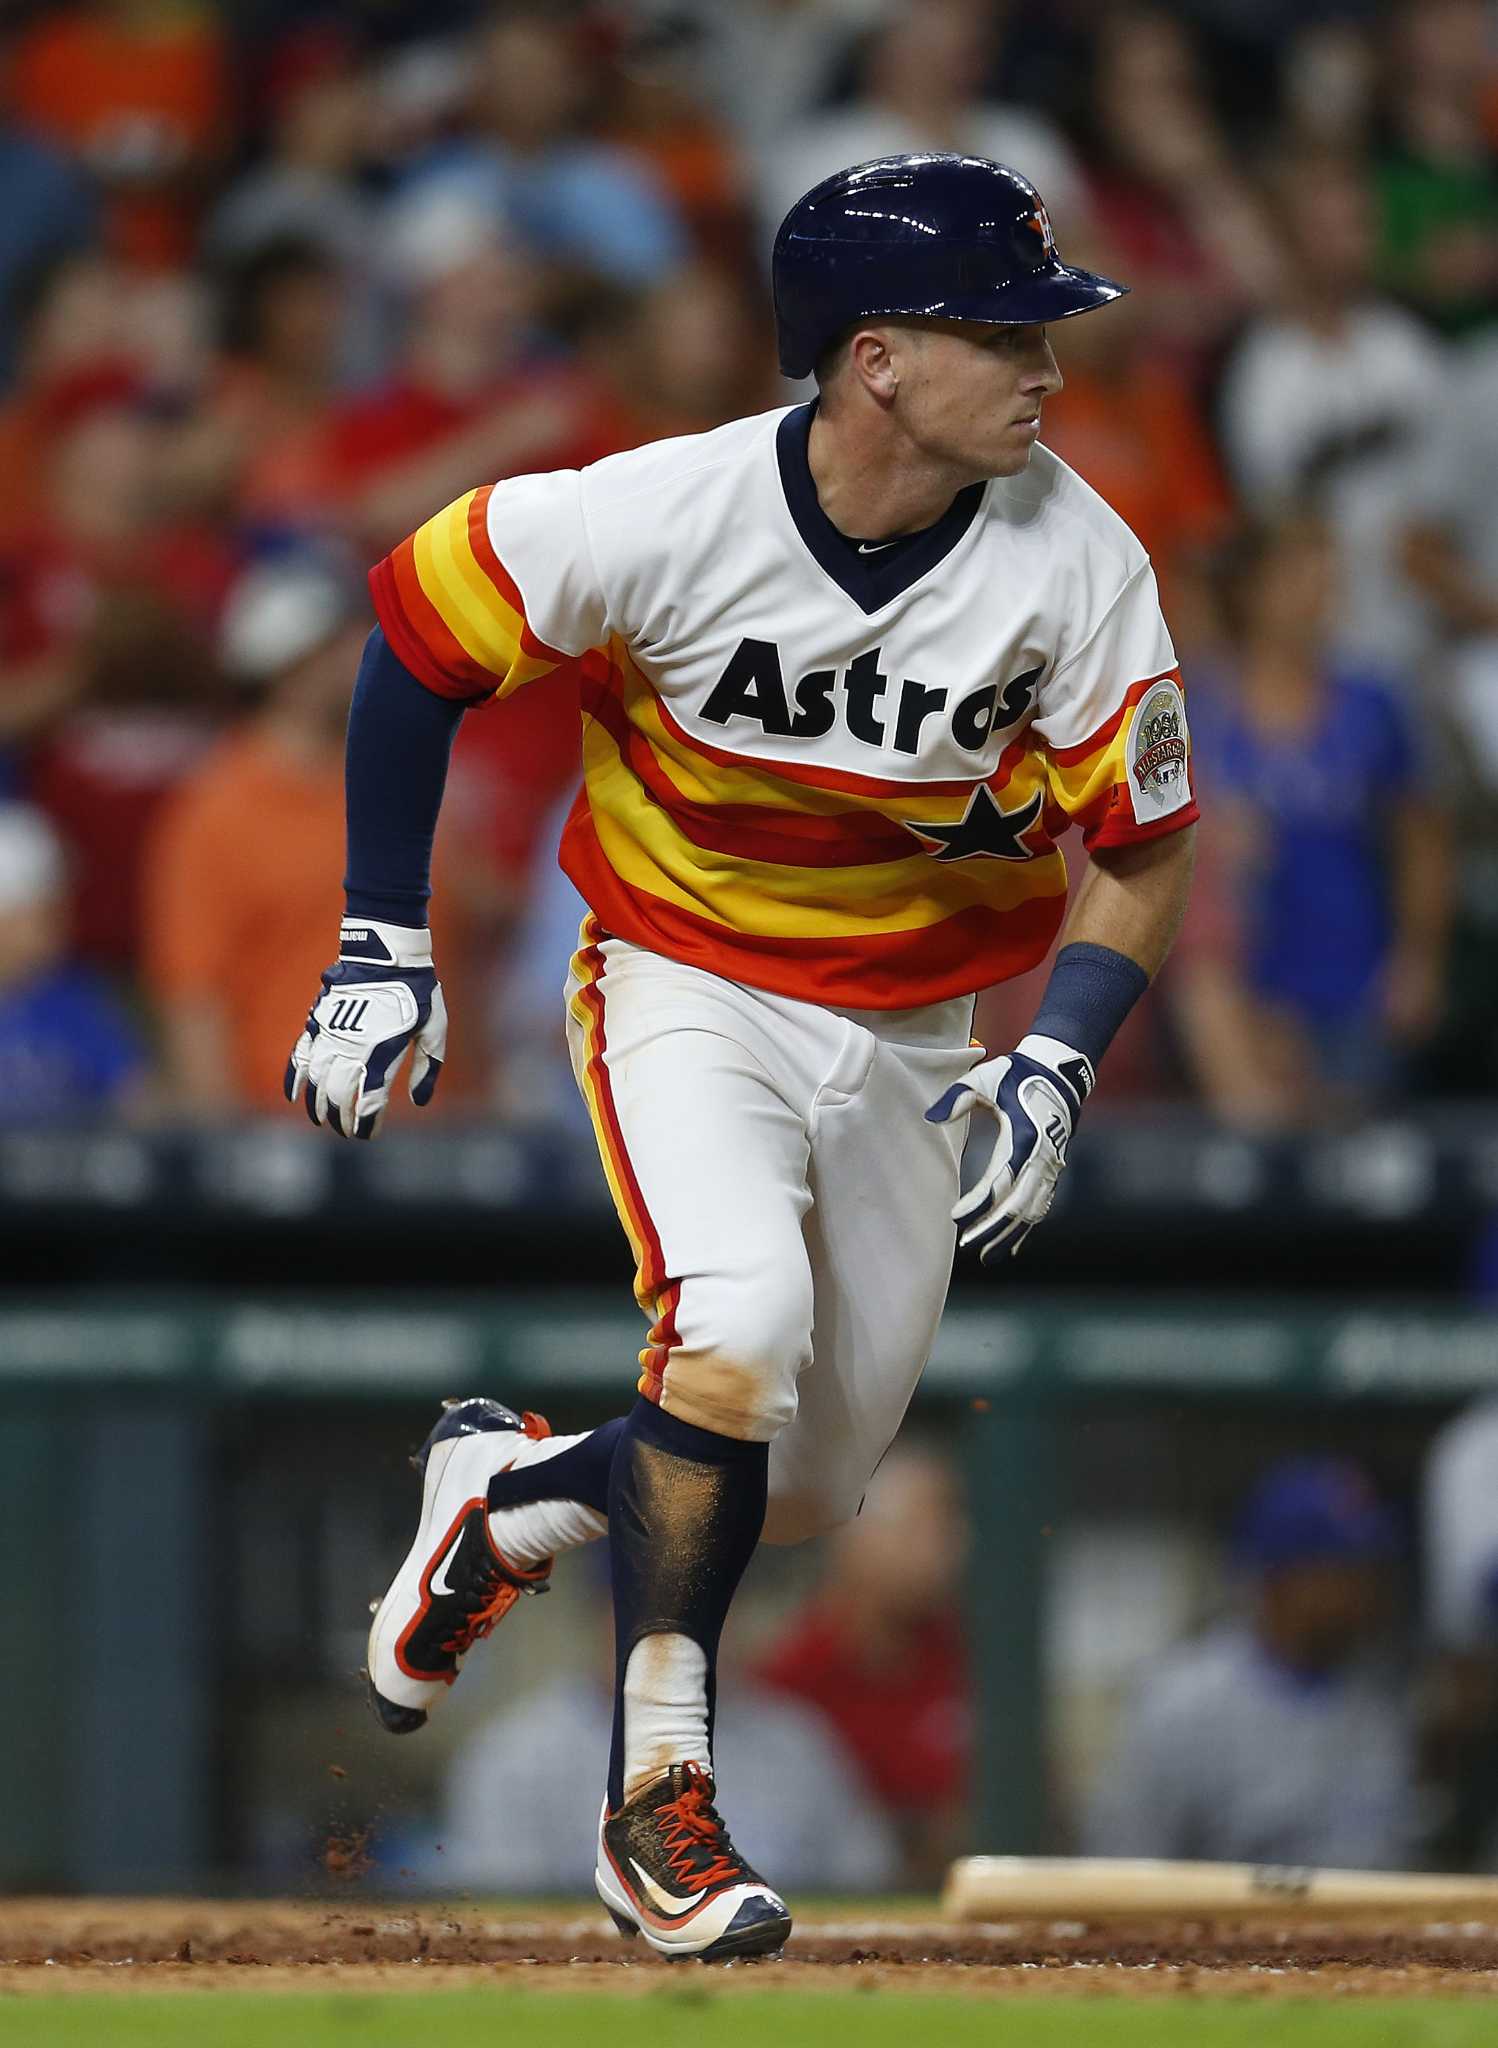 Astros manager A.J. Hinch says Alex Bregman has started hitting again